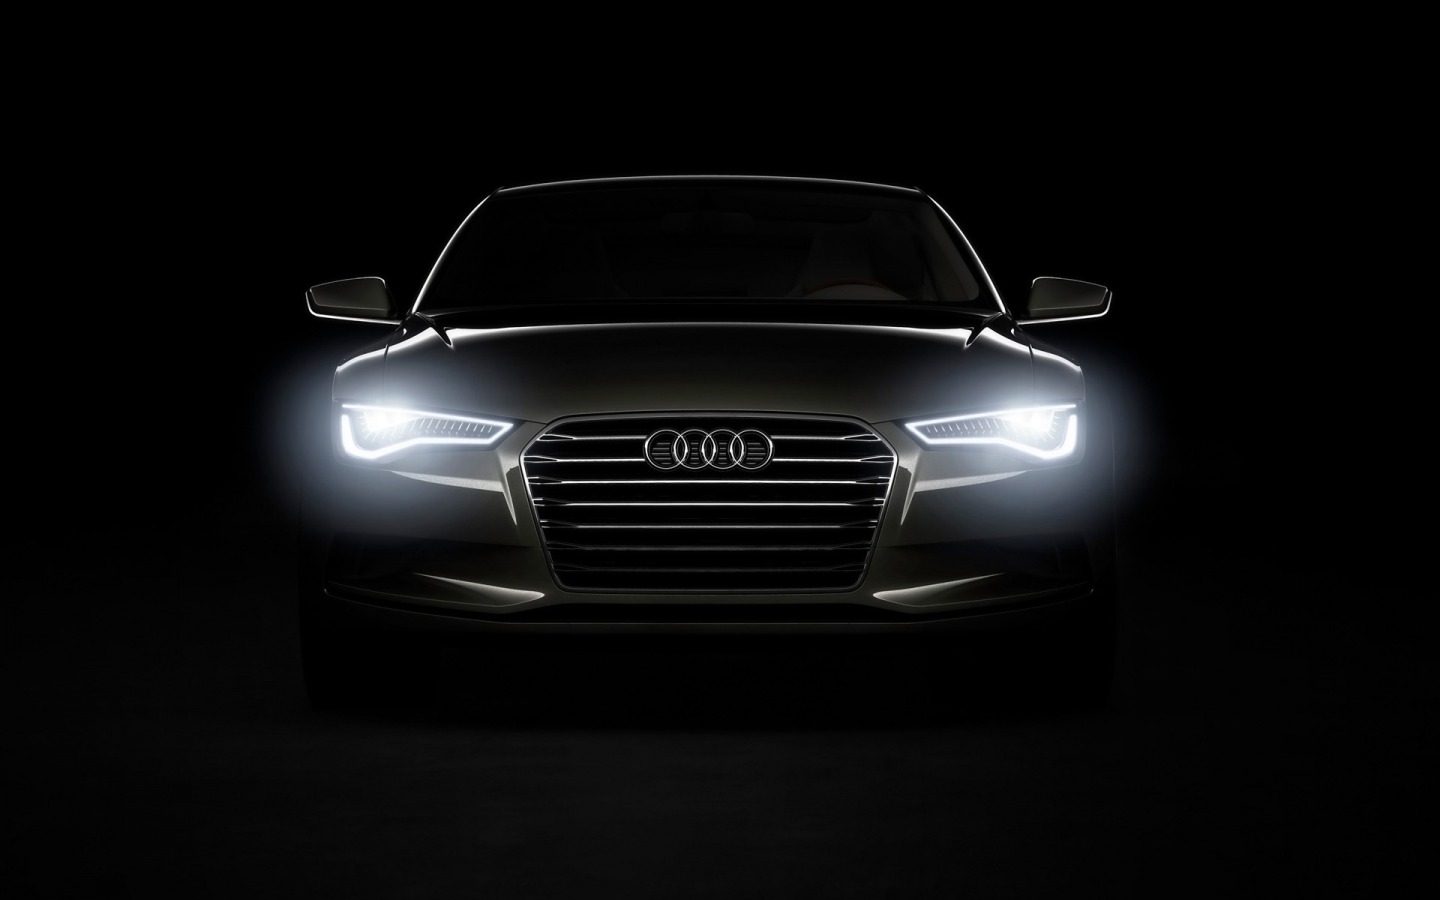 Audi A7 Concept Wallpaper Cars In Jpg Format For